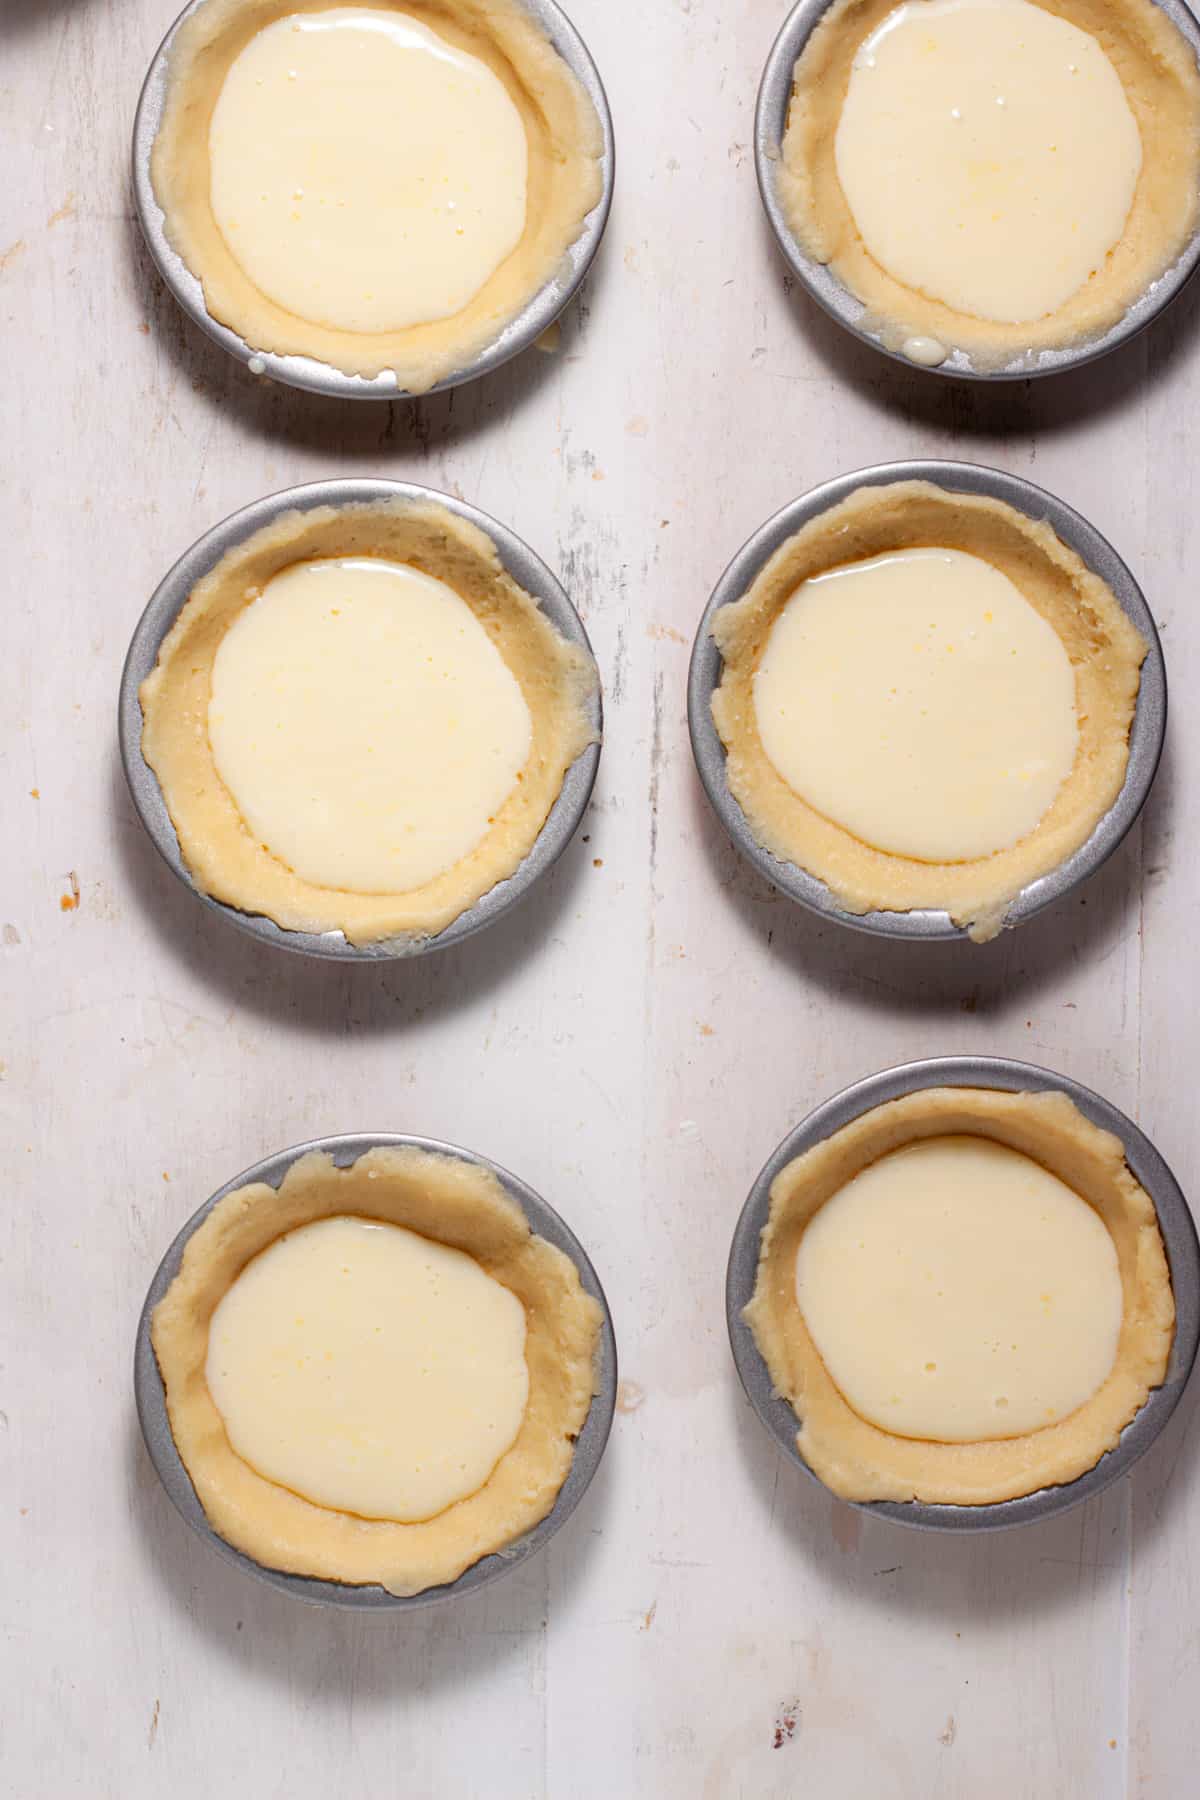 Mini peach custard pies getting assembled with the custard portion poured into the unbaked pie crust.